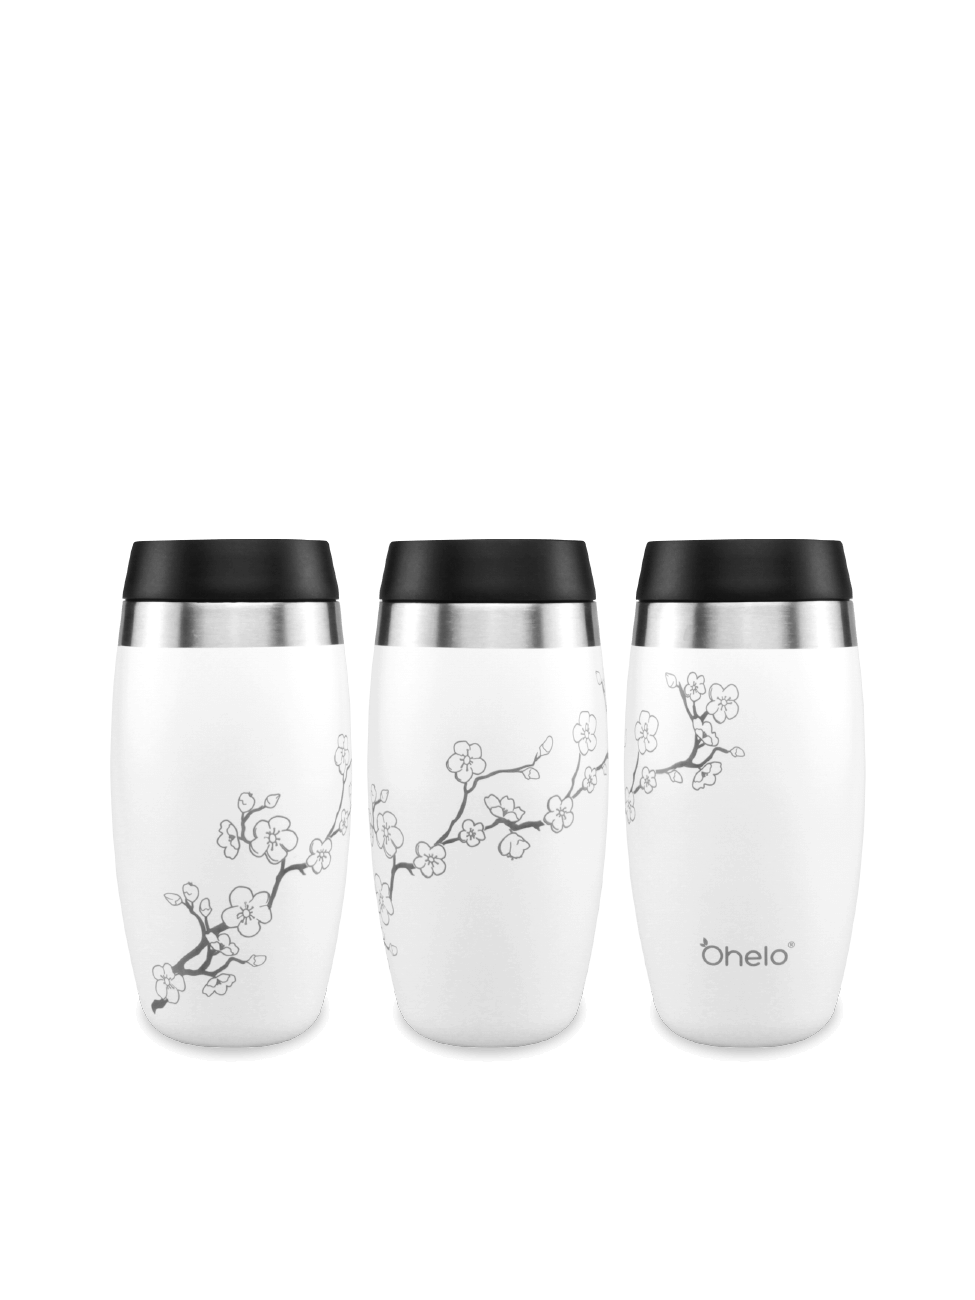 Ohelo BPA free travel mug in white with floral design - image showing design from 3 sides